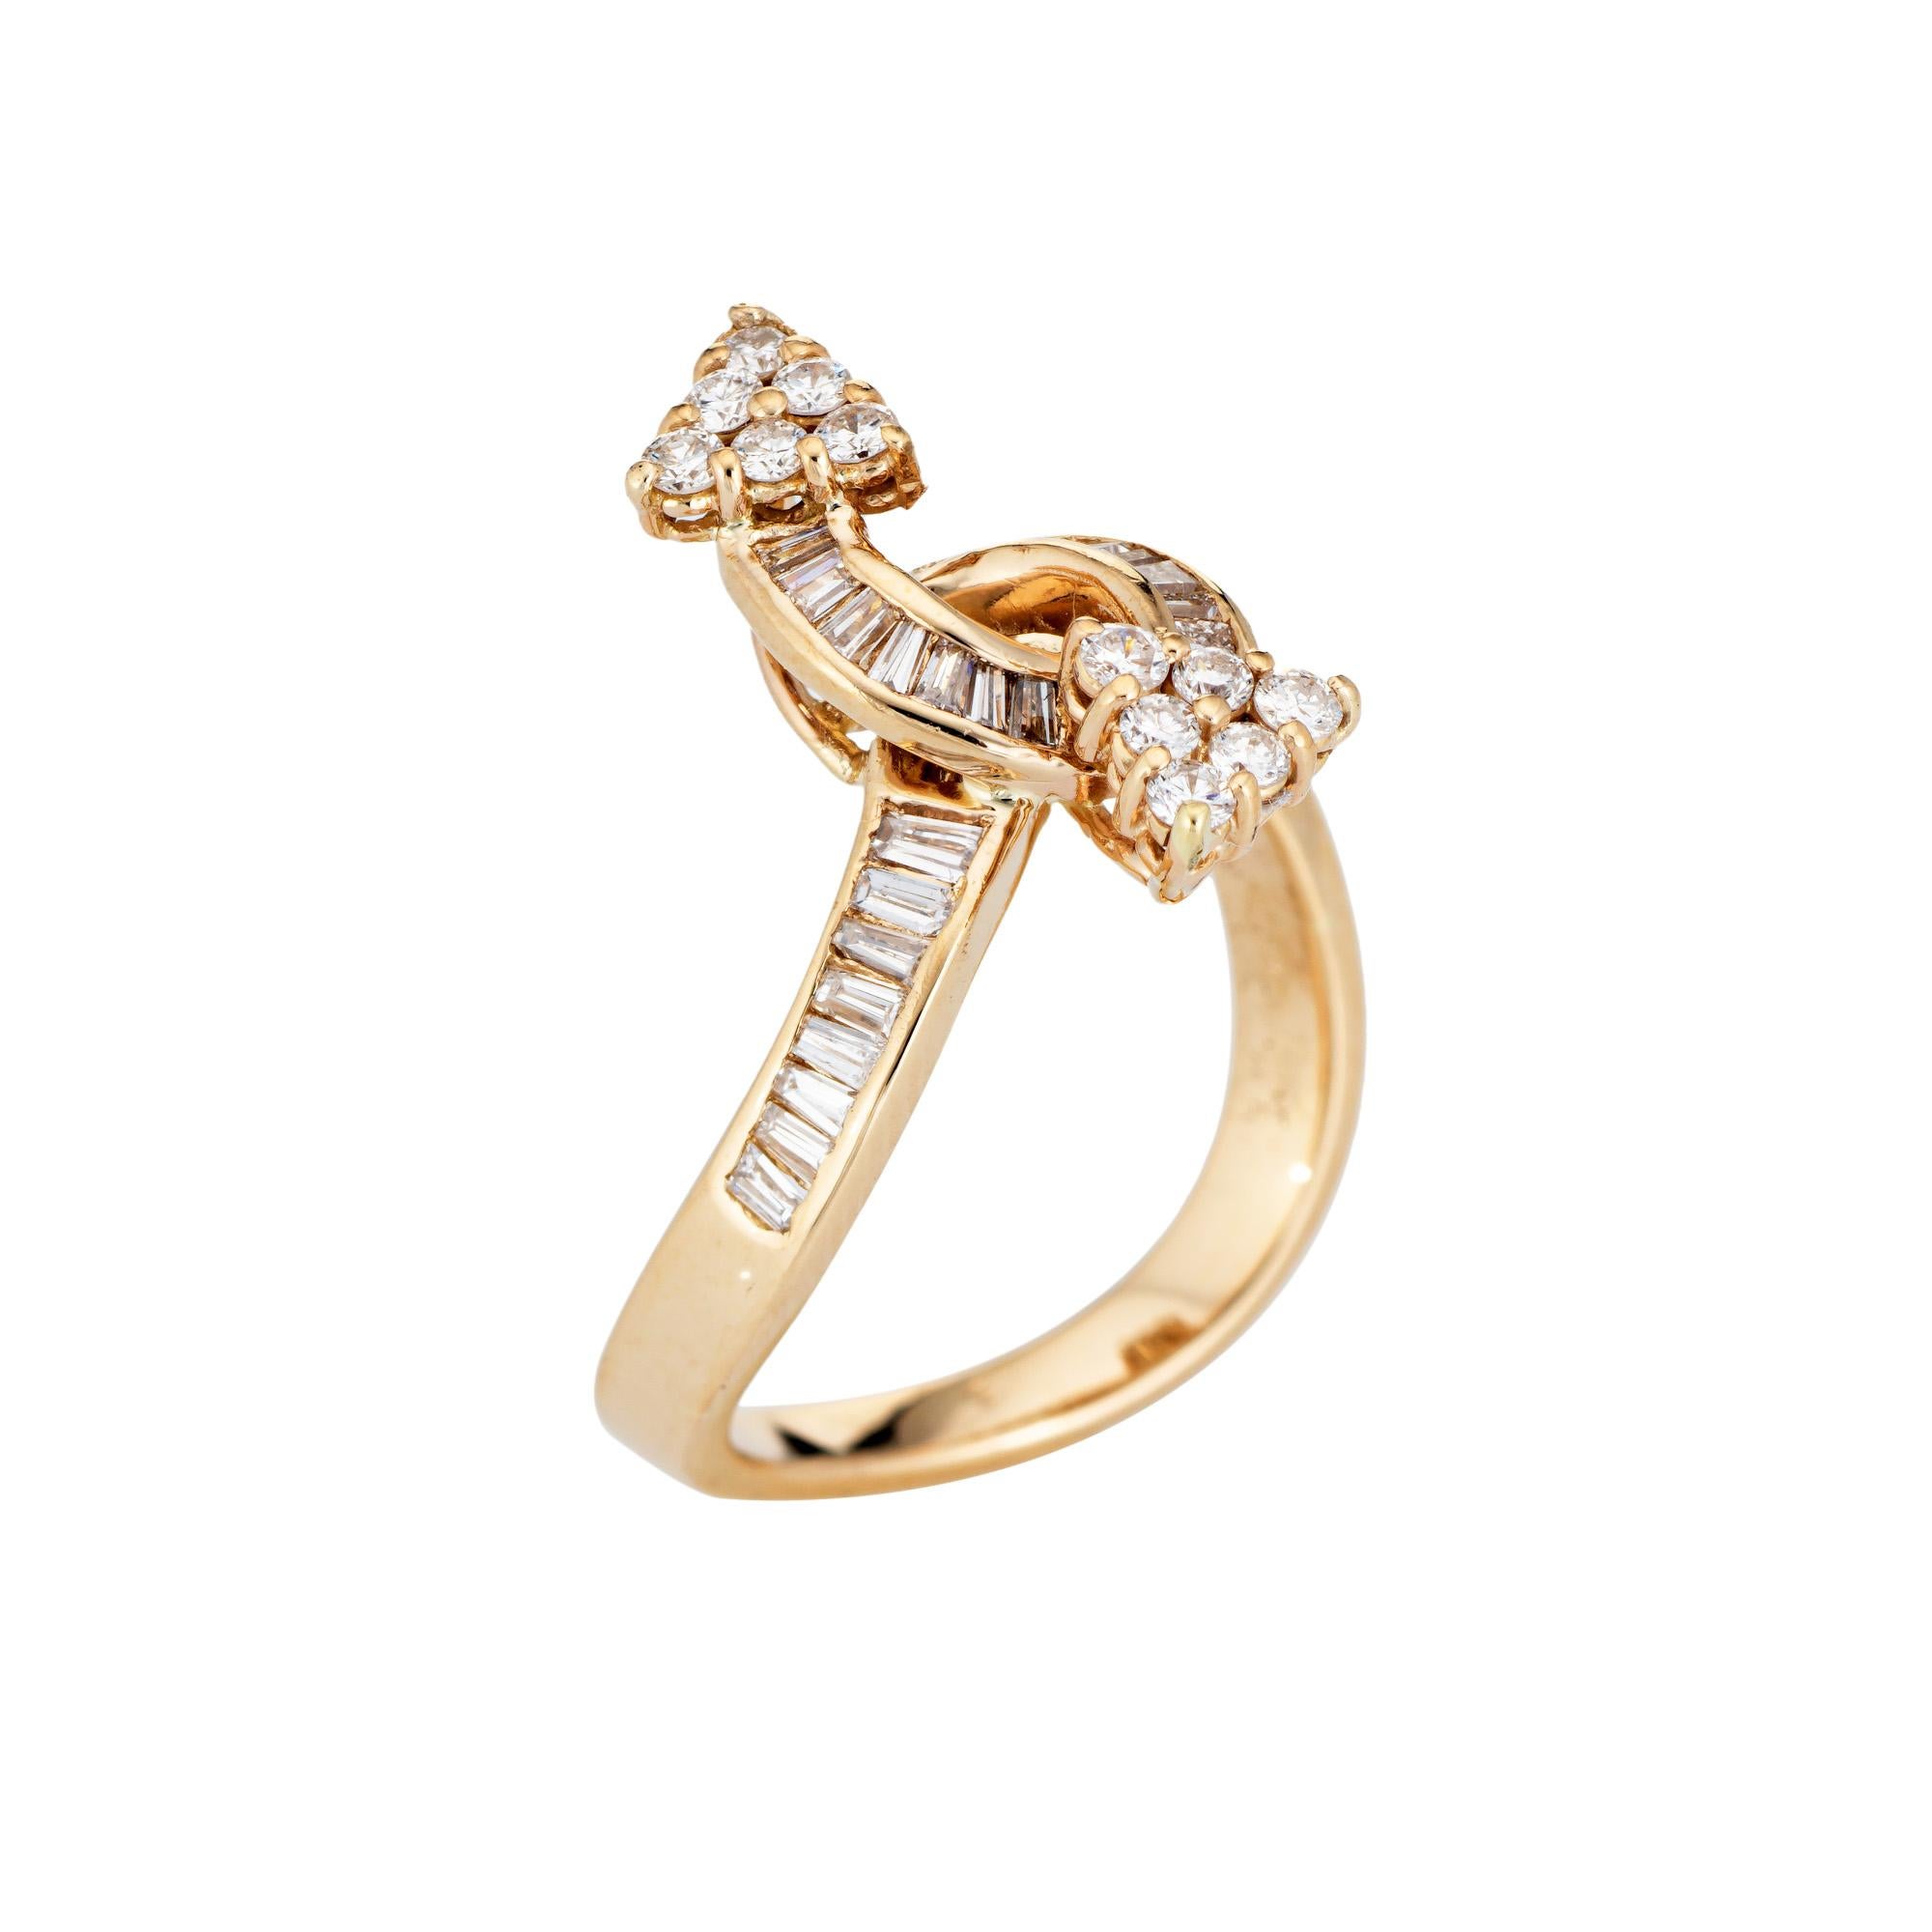 Stylish vintage diamond arrow bypass ring (circa 1990s) crafted in 14 karat yellow gold. 

42 round brilliant and baguette cut diamonds total an estimated 0.84 carats (estimated at I-J color and VS2-I1 clarity). 

Set in opposing design the arrow